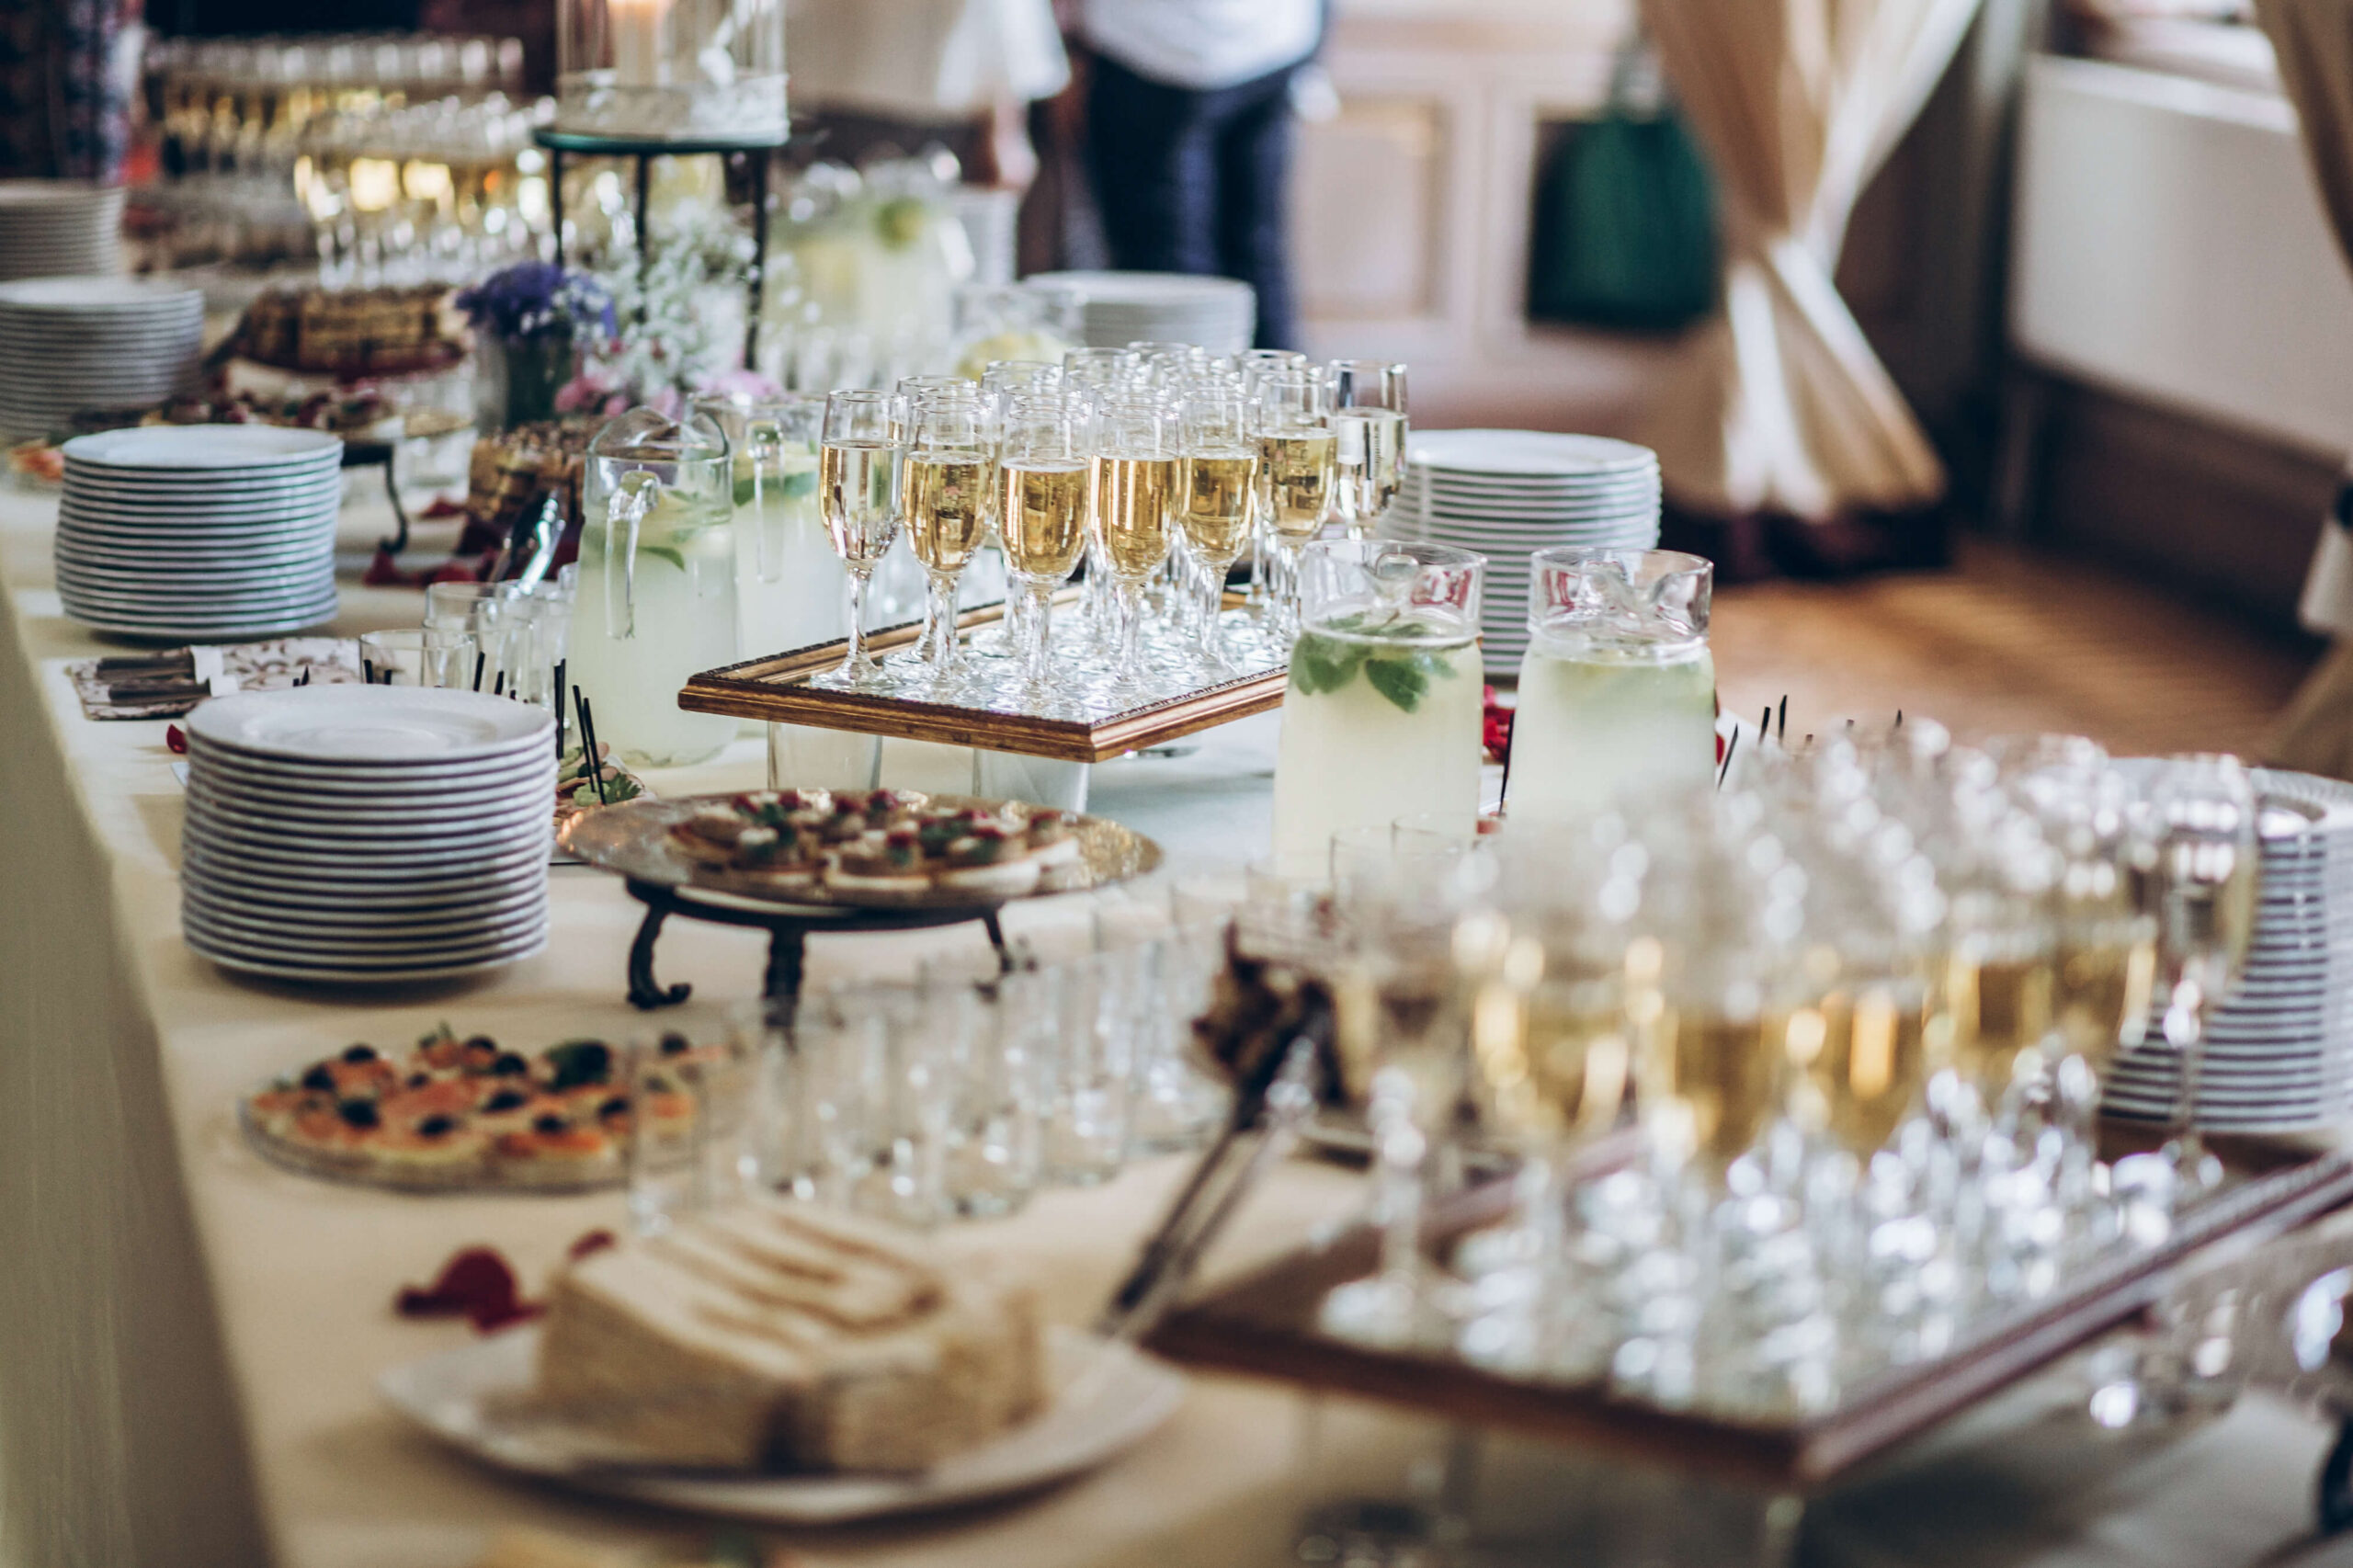 stylish champagne glasses and food appetizers on table at wedding reception